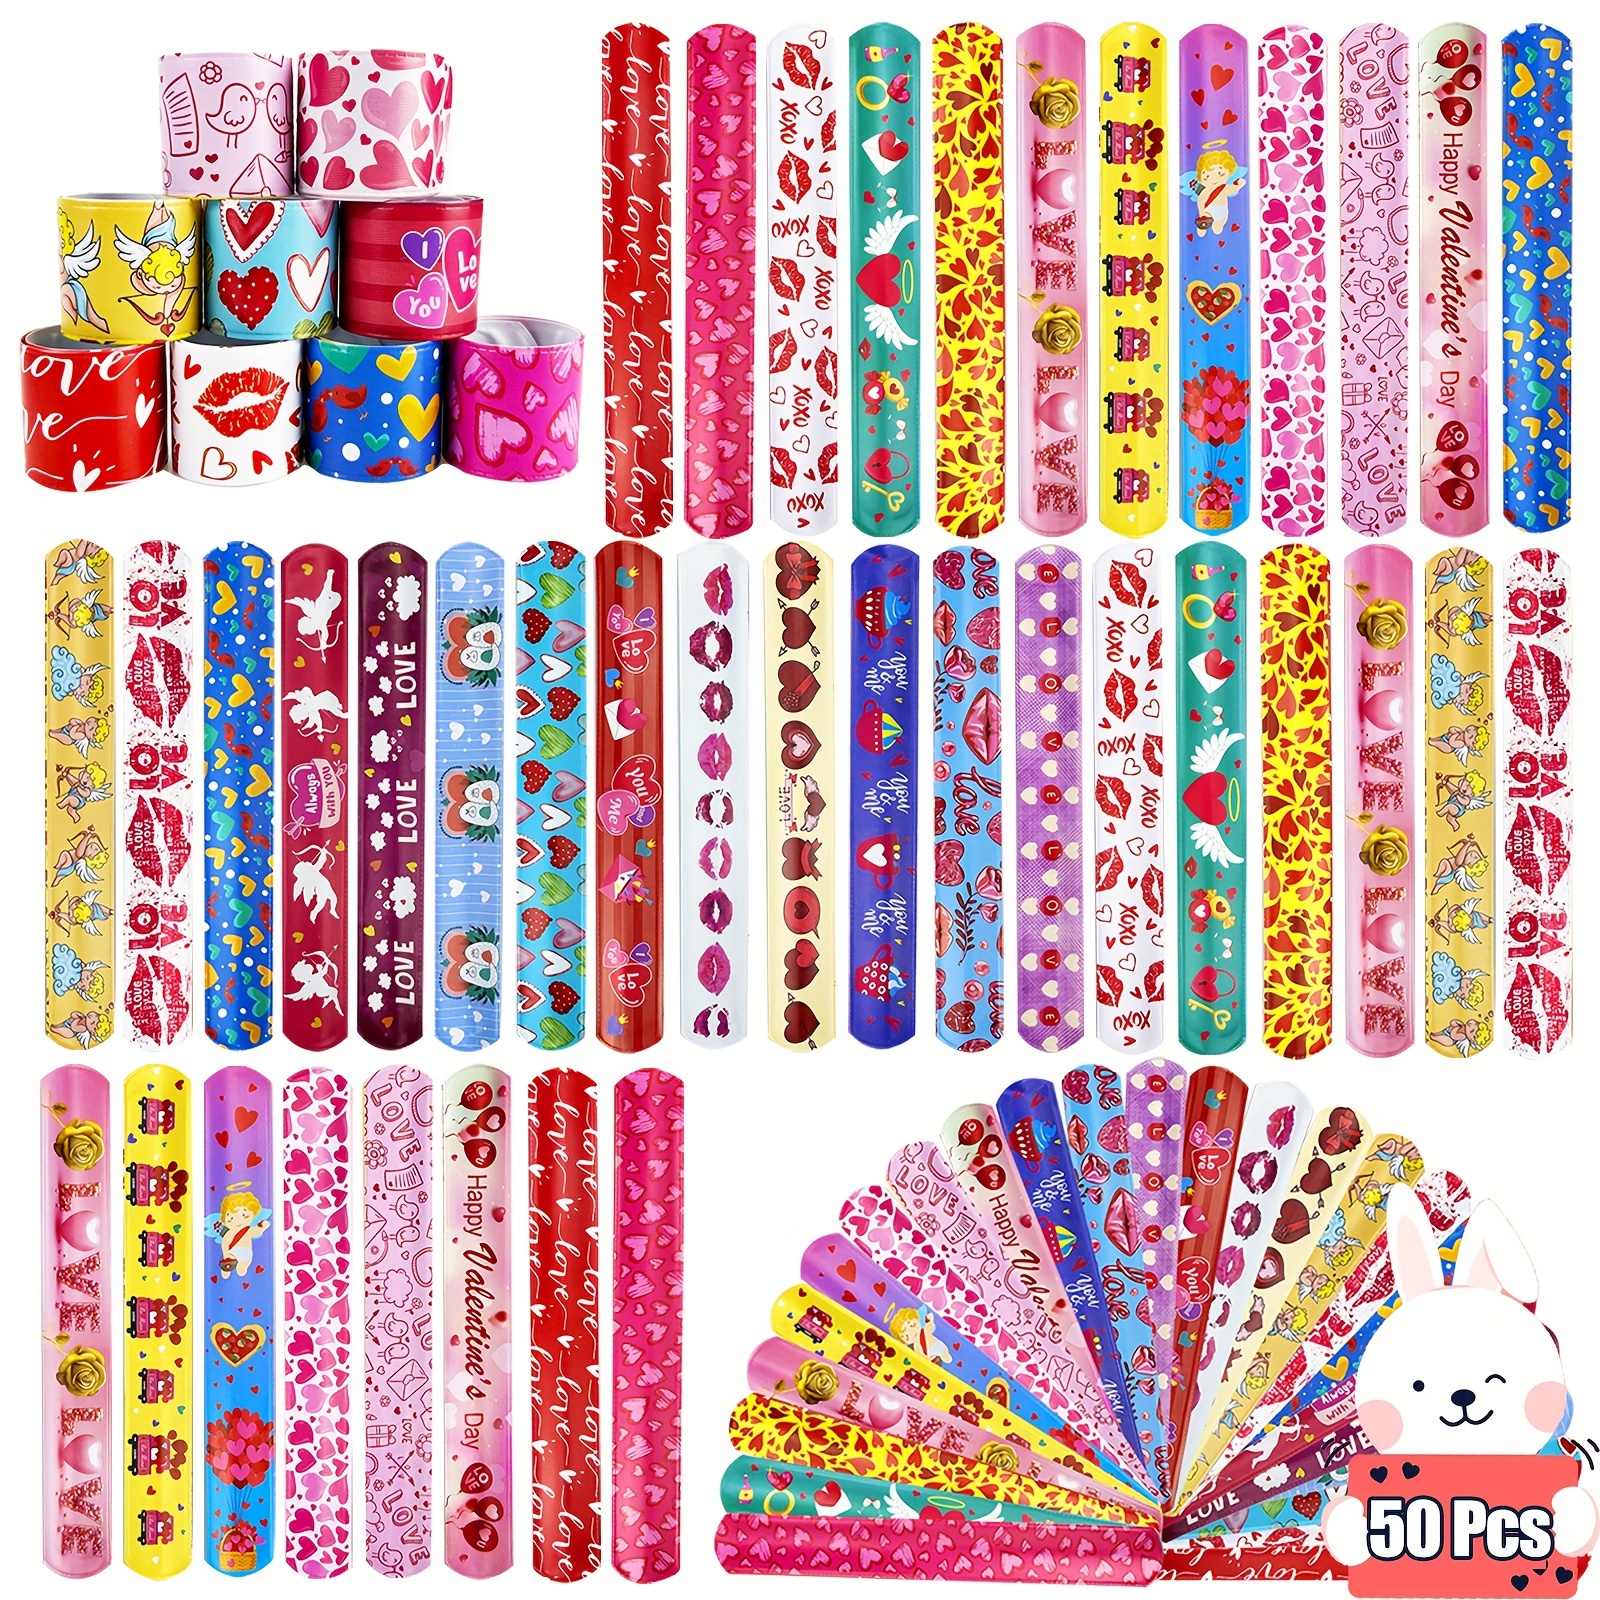 Valentines Day Cards for kids,Set of 32 Crazy Straws Bulk, Valentines Day  Gifts for Kids Colorful Valentine Exchange Cards Loop Reusable Drinking